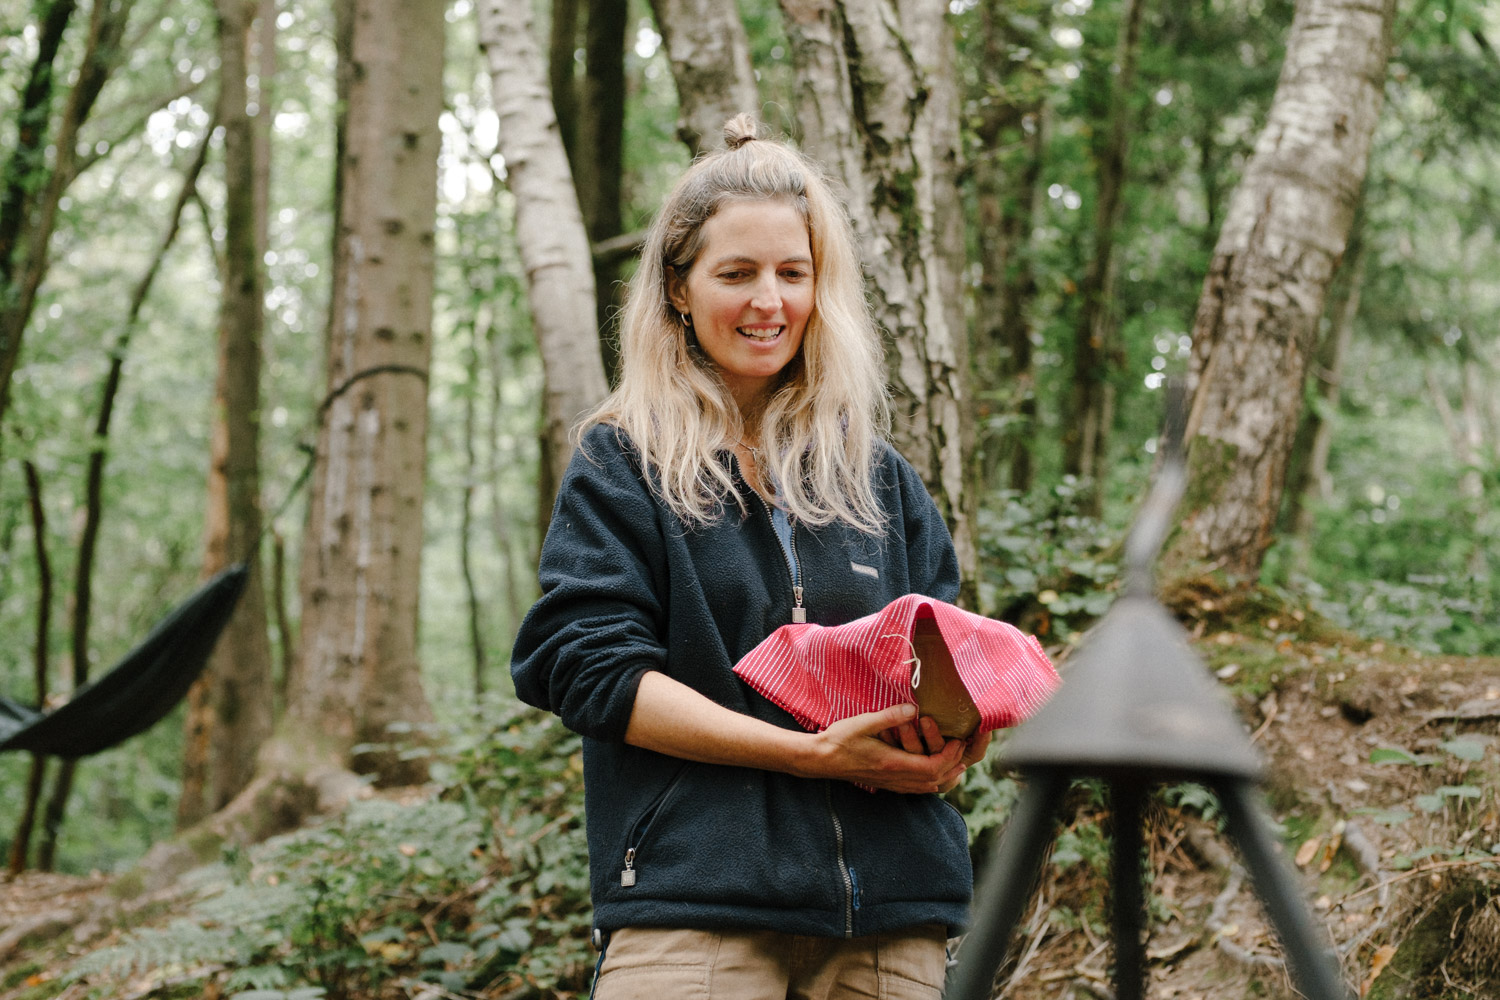 A picture of a blond woman in a grey fleece and tanned trousers. She is holding a mixing bowl with a red tea towel over the top. She is stood in the forest and there's a hammock hanging in the background.